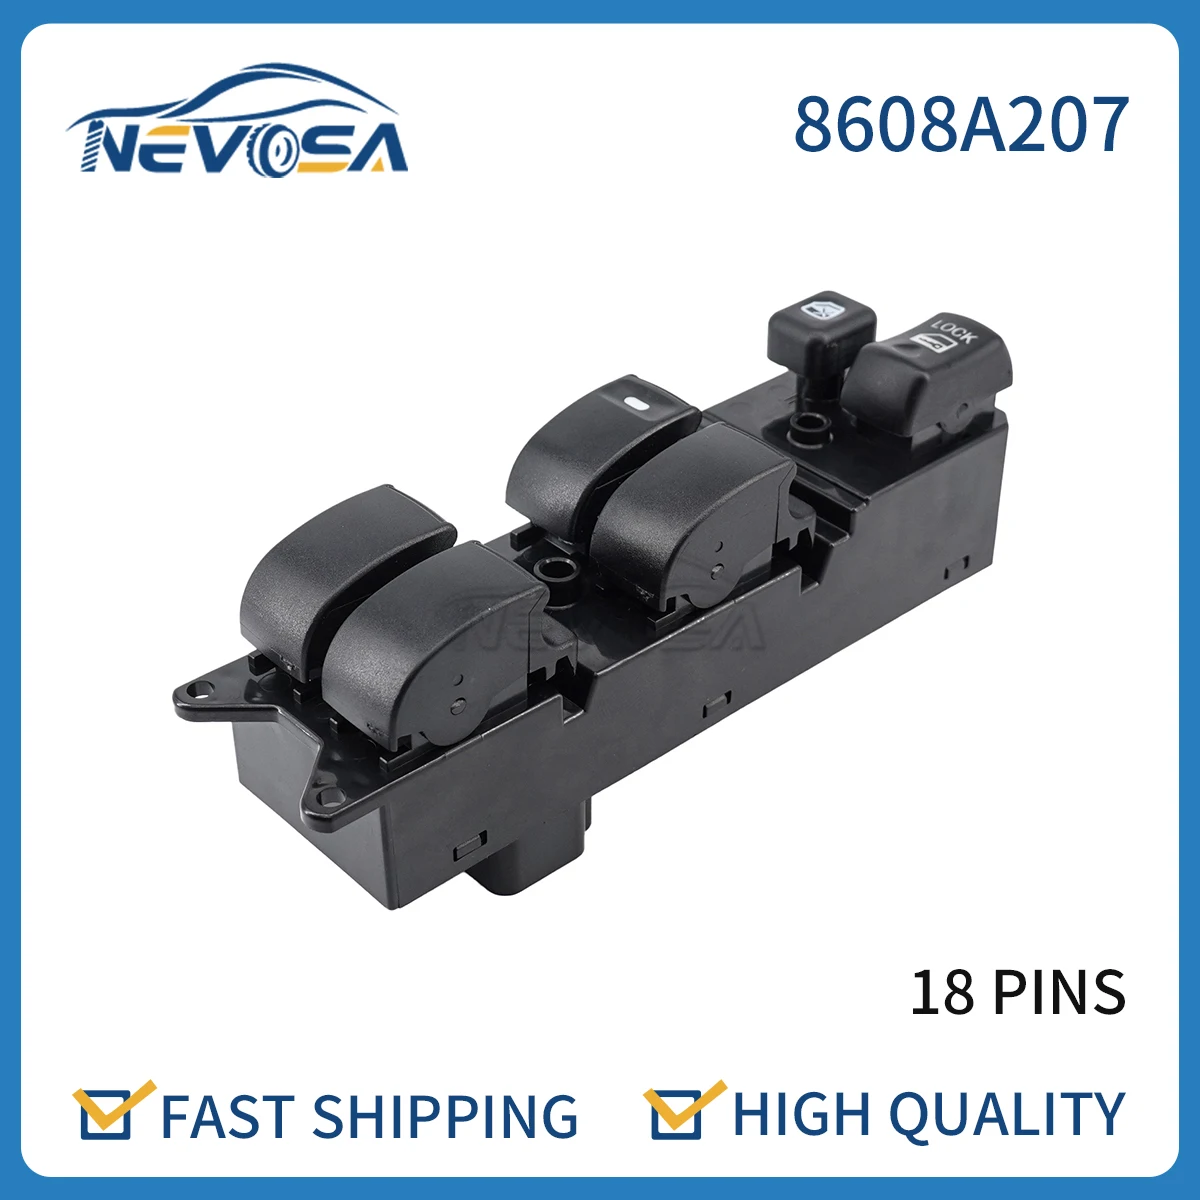 

Nevosa 8608A207 For Mitsubishi Outlander Sport Front Left Driver Side LHD Master Power Window Switch Car Accessories C8DD654M